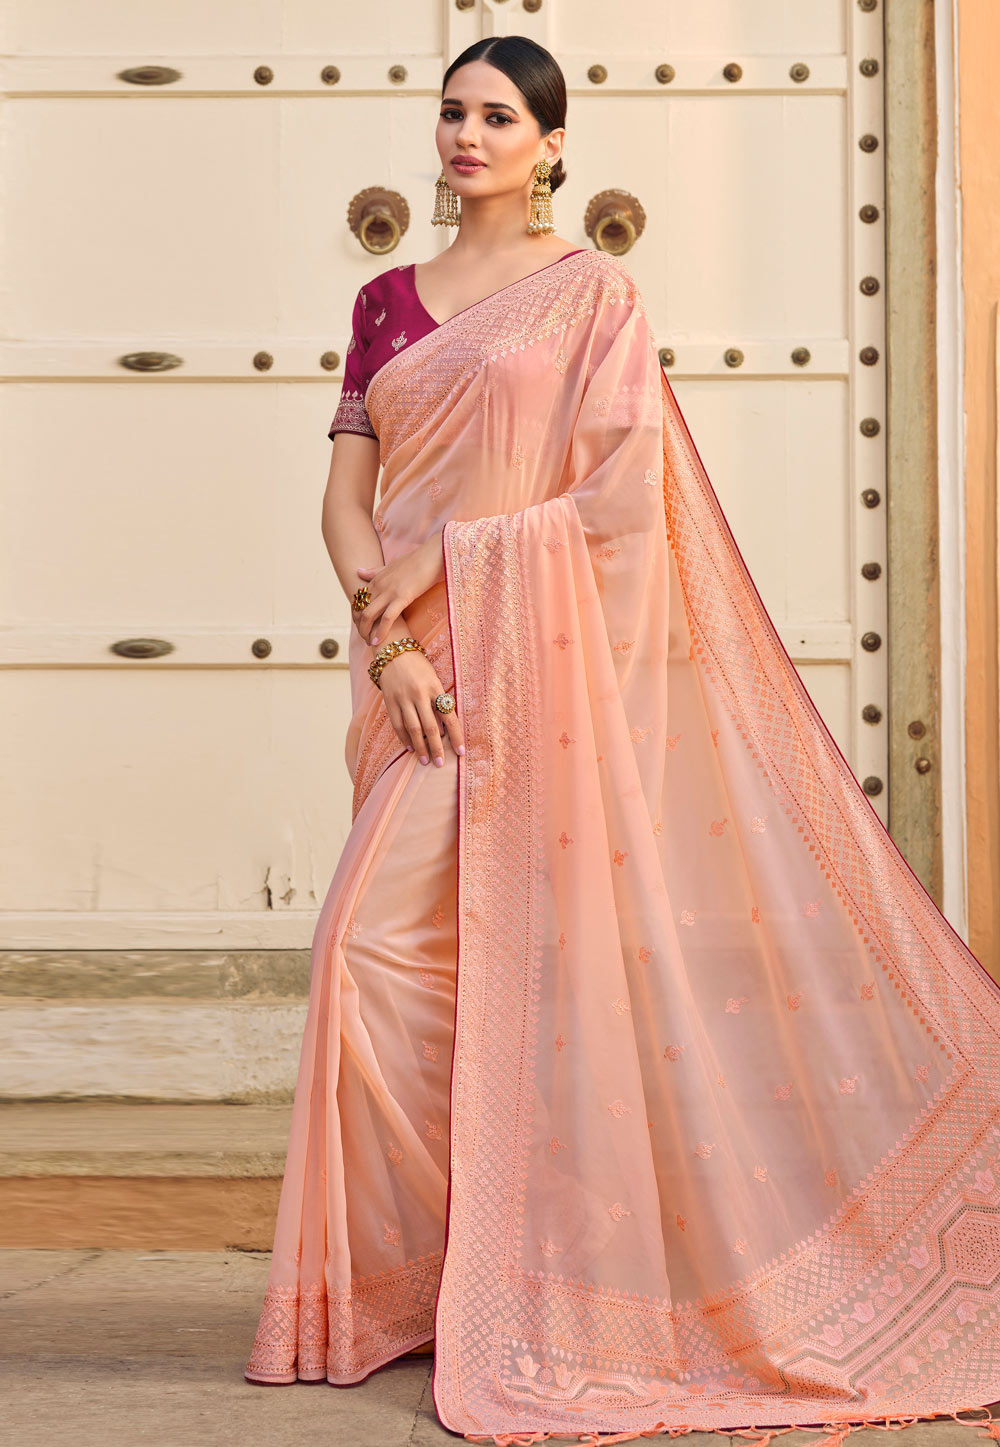 Add Color To Orange Kanjeevaram Sarees With These Four Contrast Blouse  Options